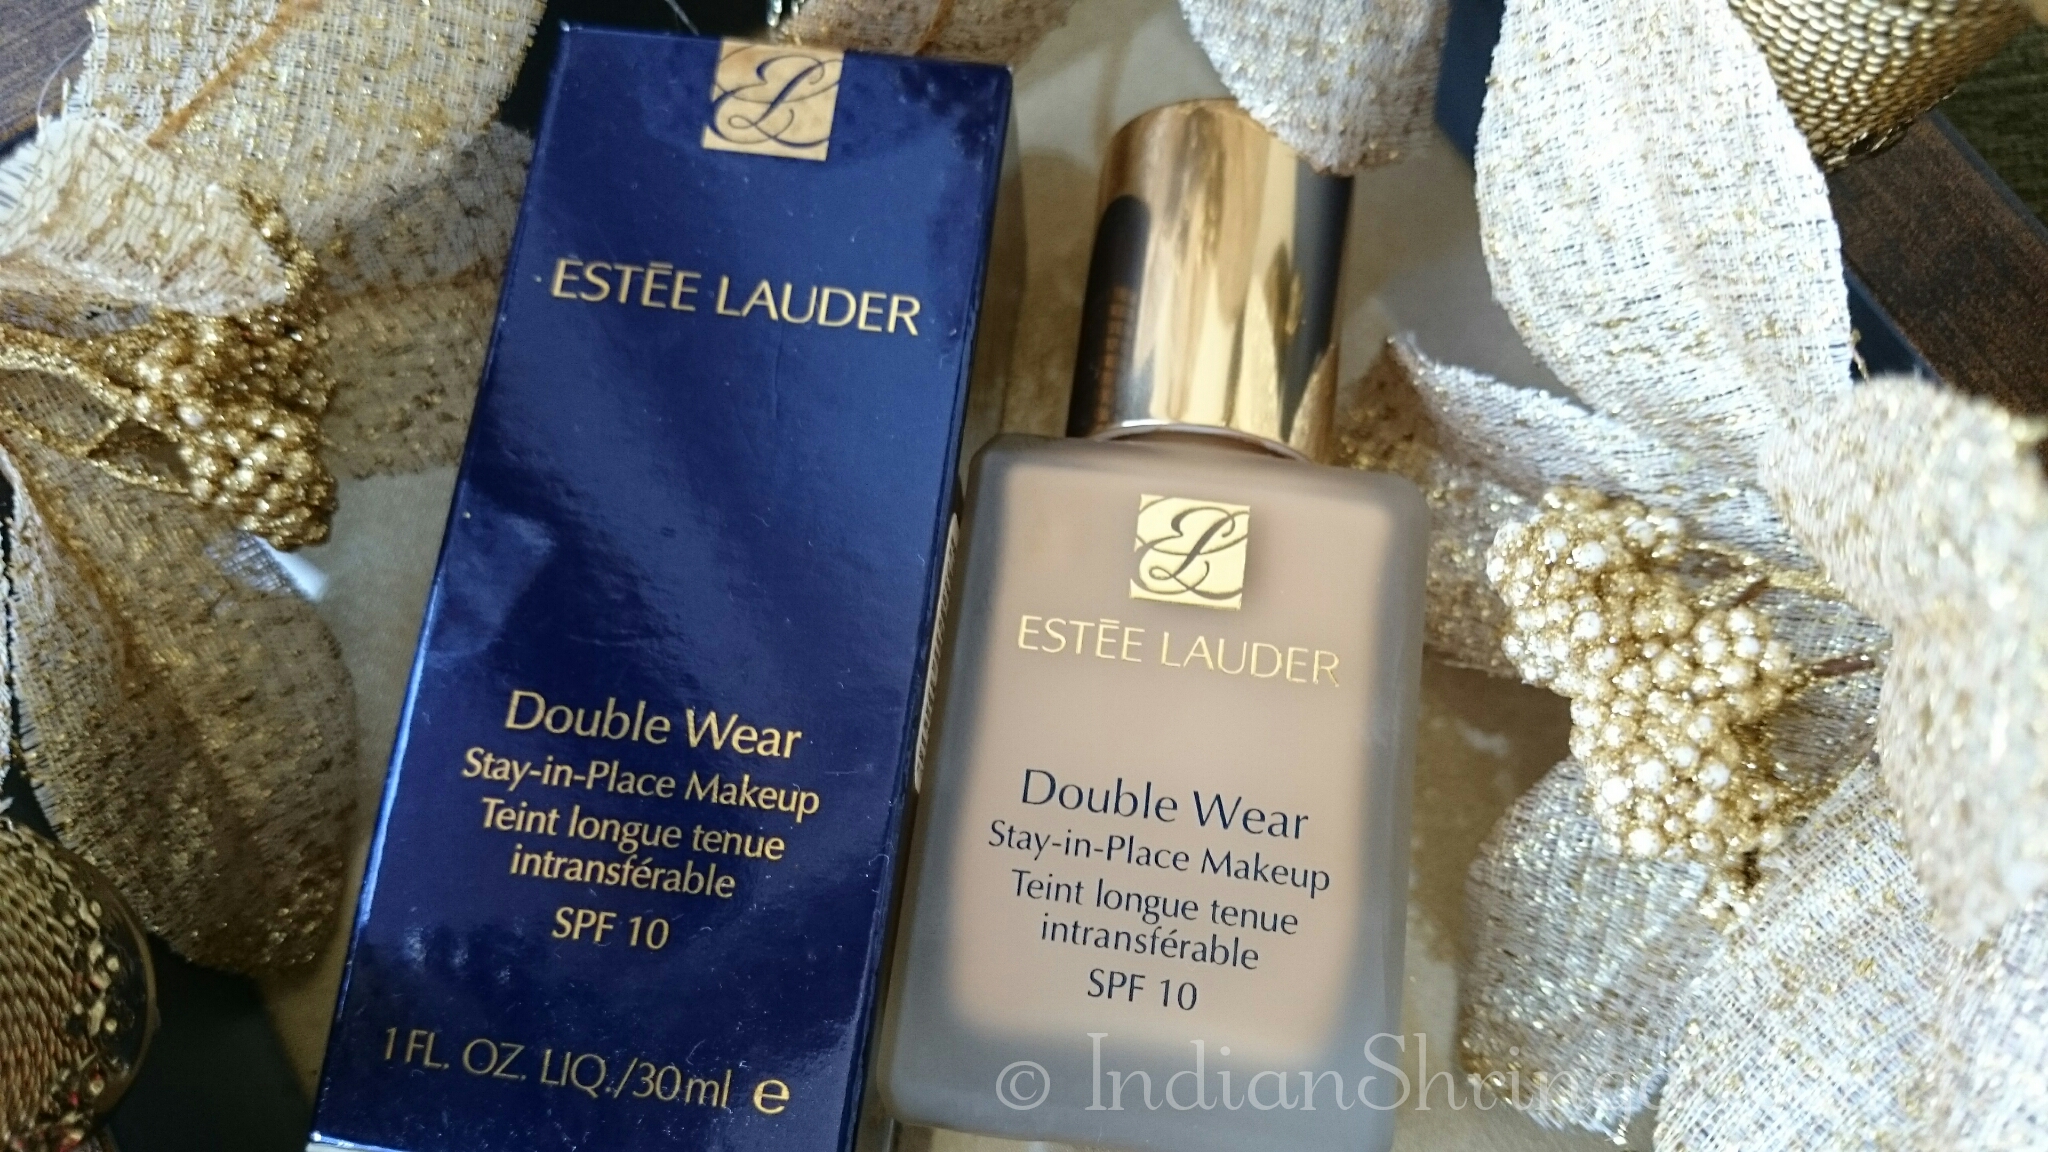 Estee Lauder Double Wear Foundation review, swatch and price in India